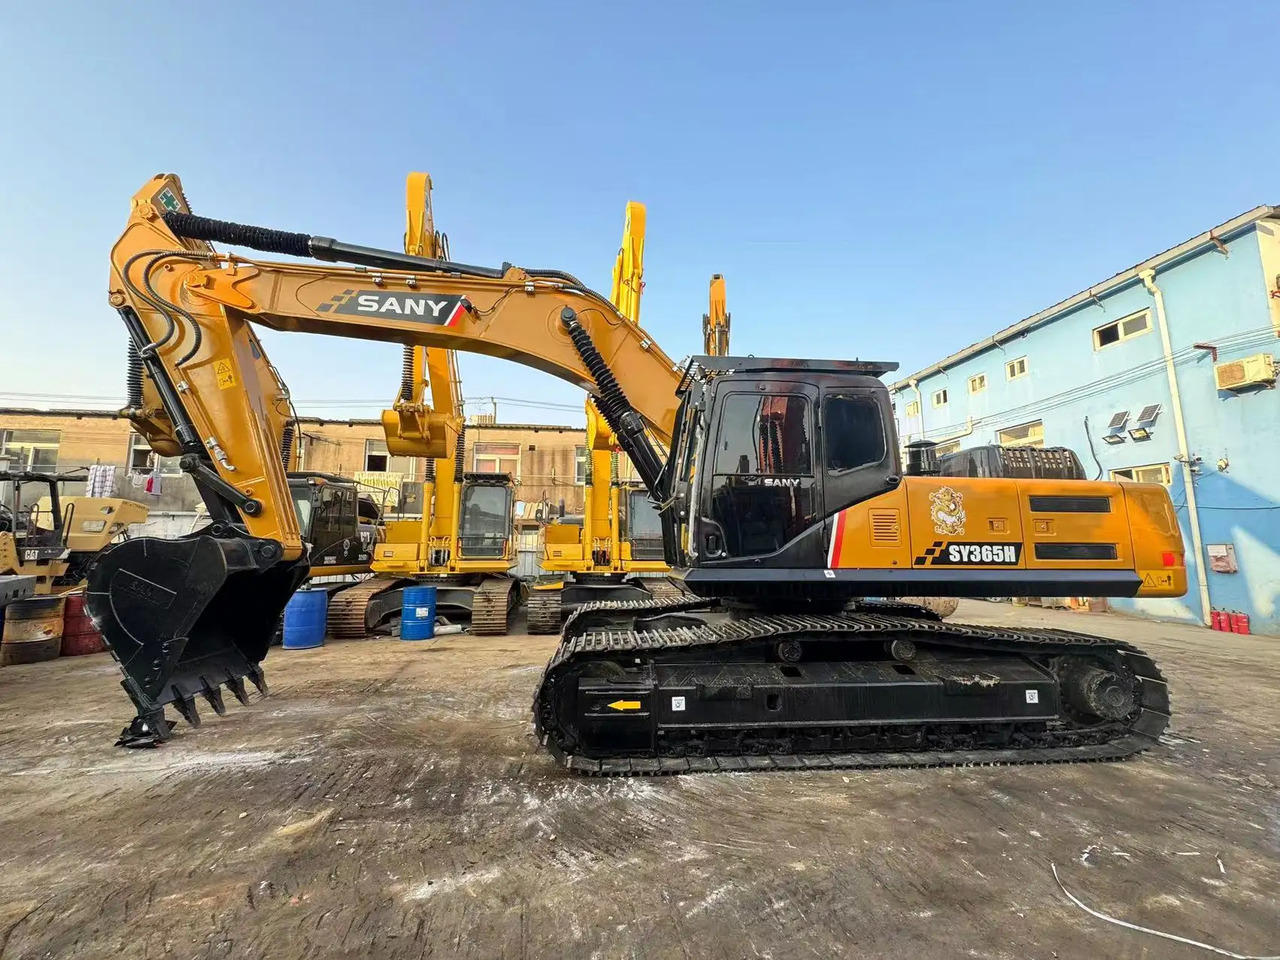 Crawler excavator China Manufacture Quality Digger Construction used 36 ton excavator Factory Directly Supply Excavator Sany 365H: picture 4